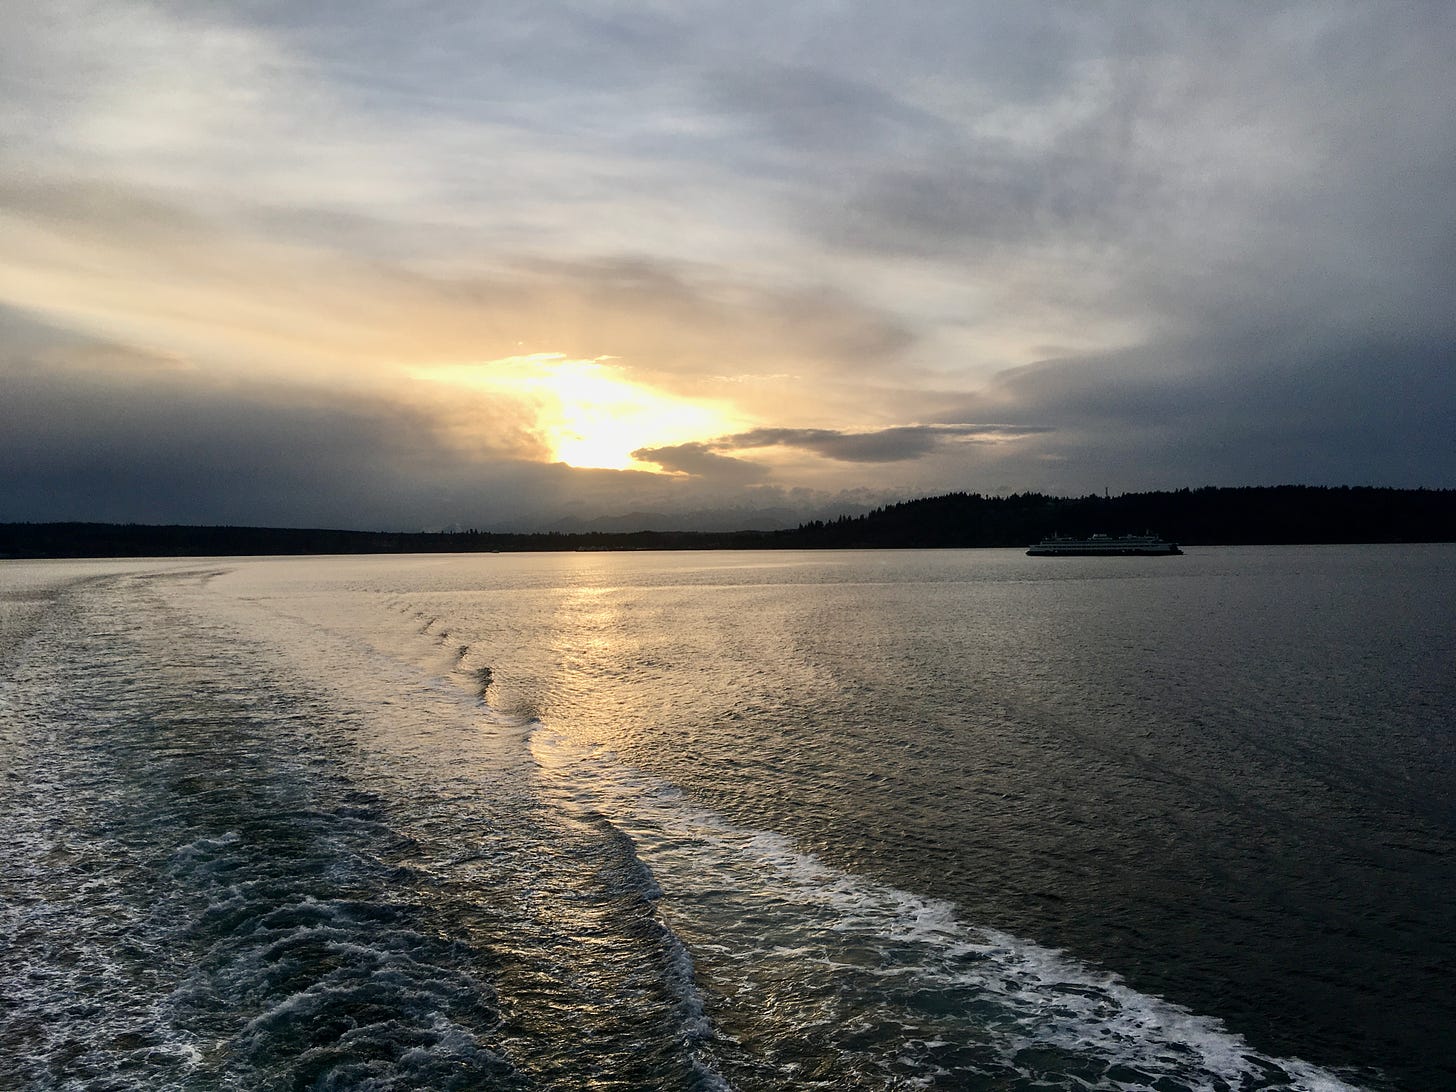 setting sun behind clouds and ferry boat in distance. picture is taken on other ferry boat and so, water flow reveals path of ferry boat.